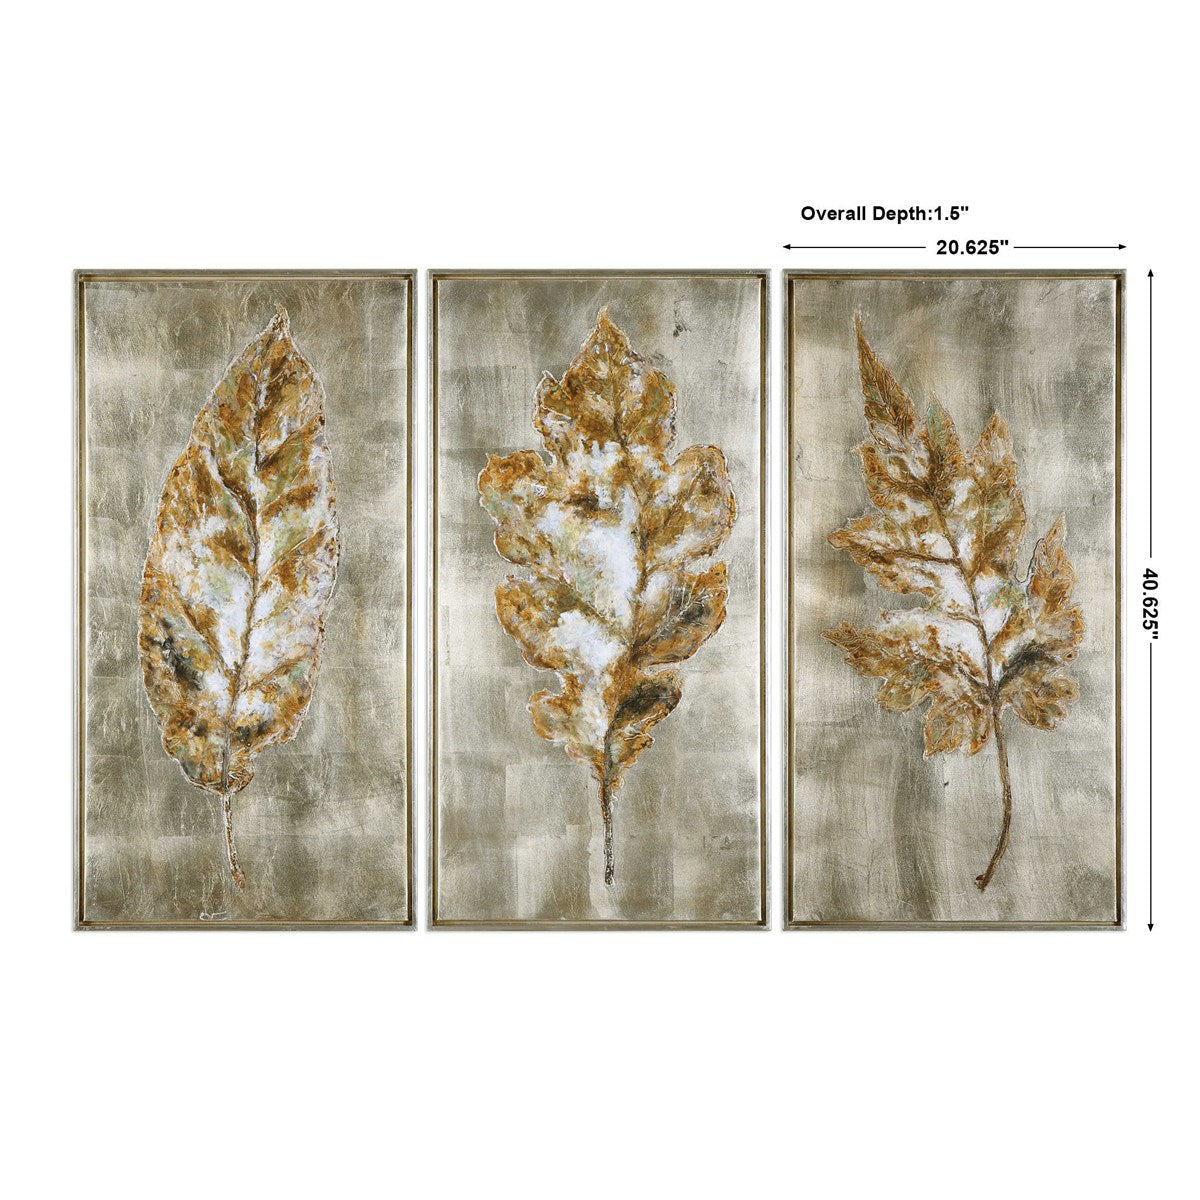 Champagne Leaves Hand Painted Canvases - Set of 3